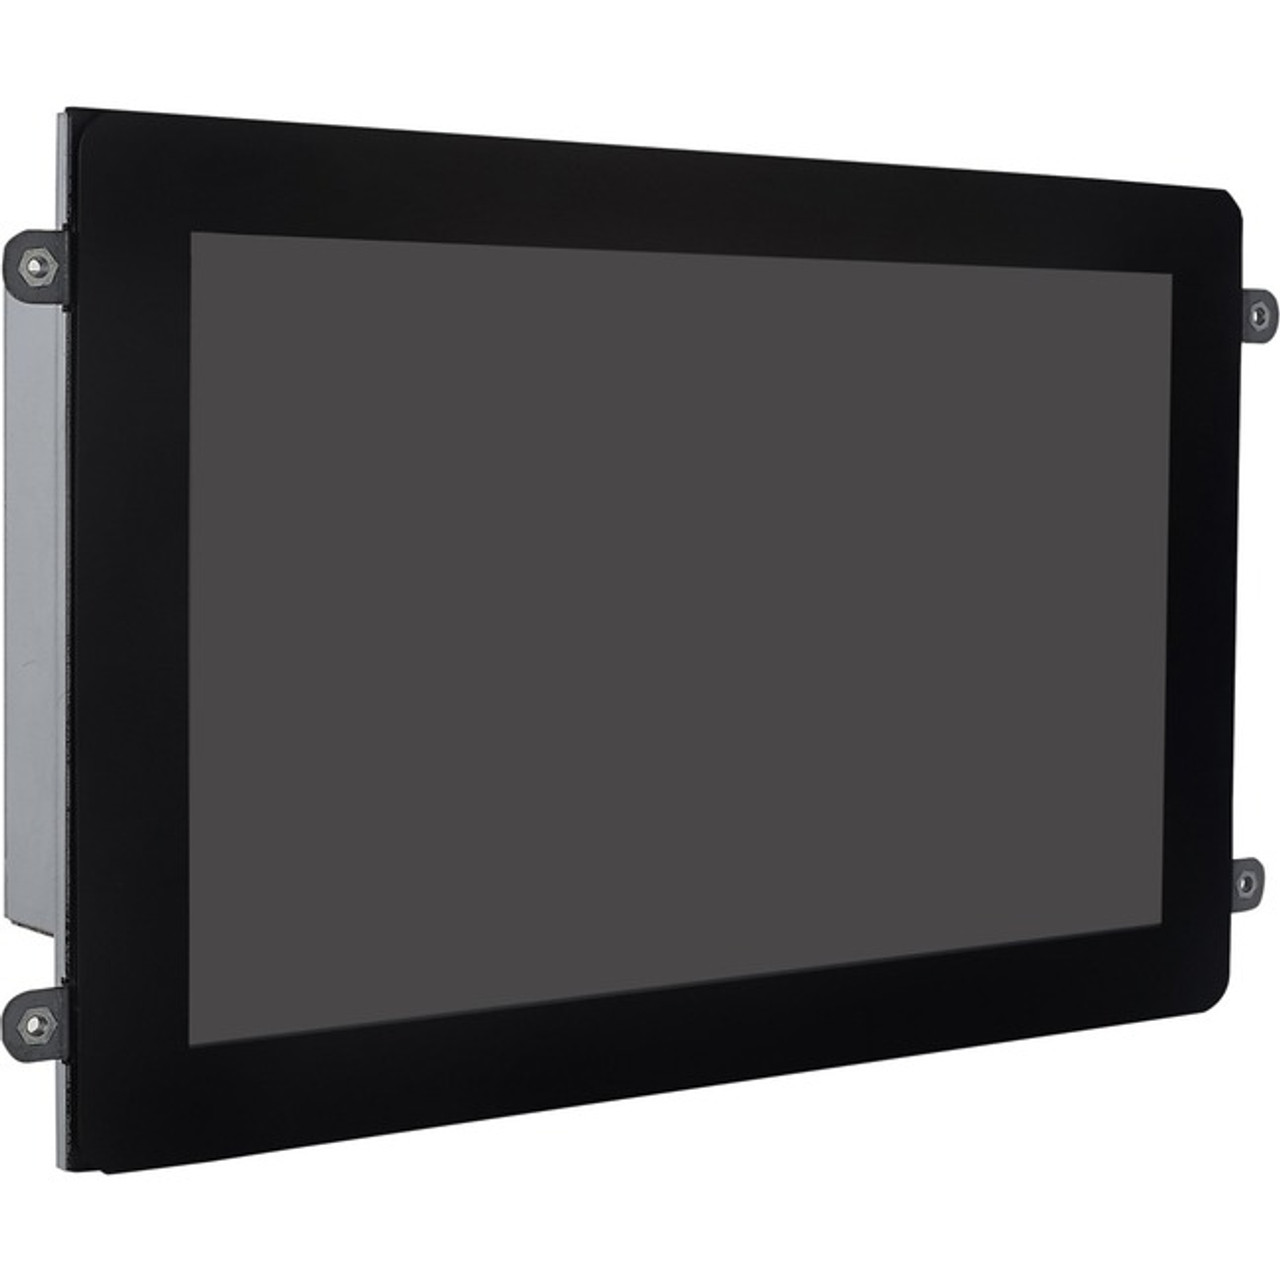 Mimo Monitors MBS-1080C-OF